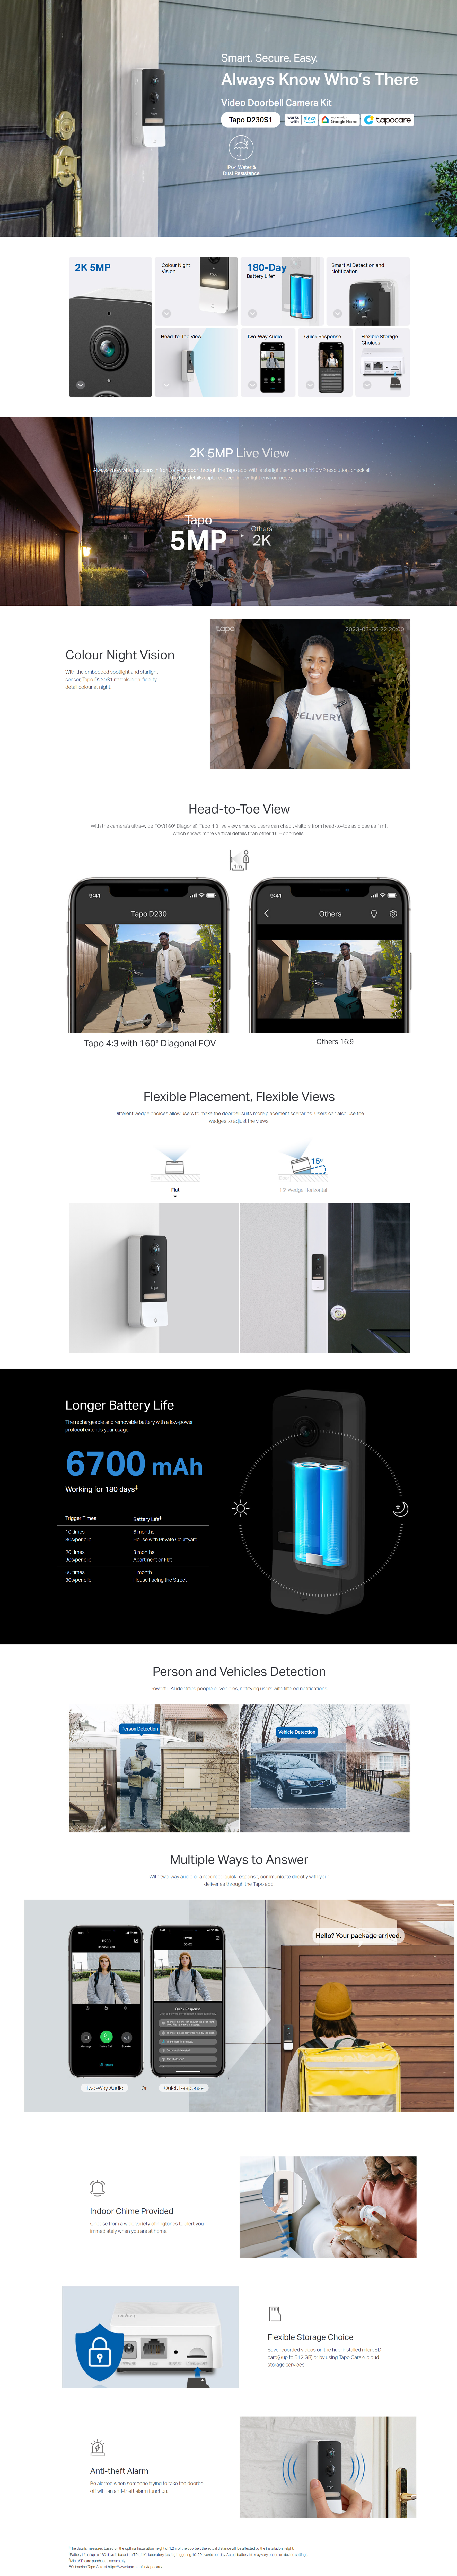 A large marketing image providing additional information about the product TP-Link Tapo D230S1 - Smart Battery Video Doorbell - Additional alt info not provided